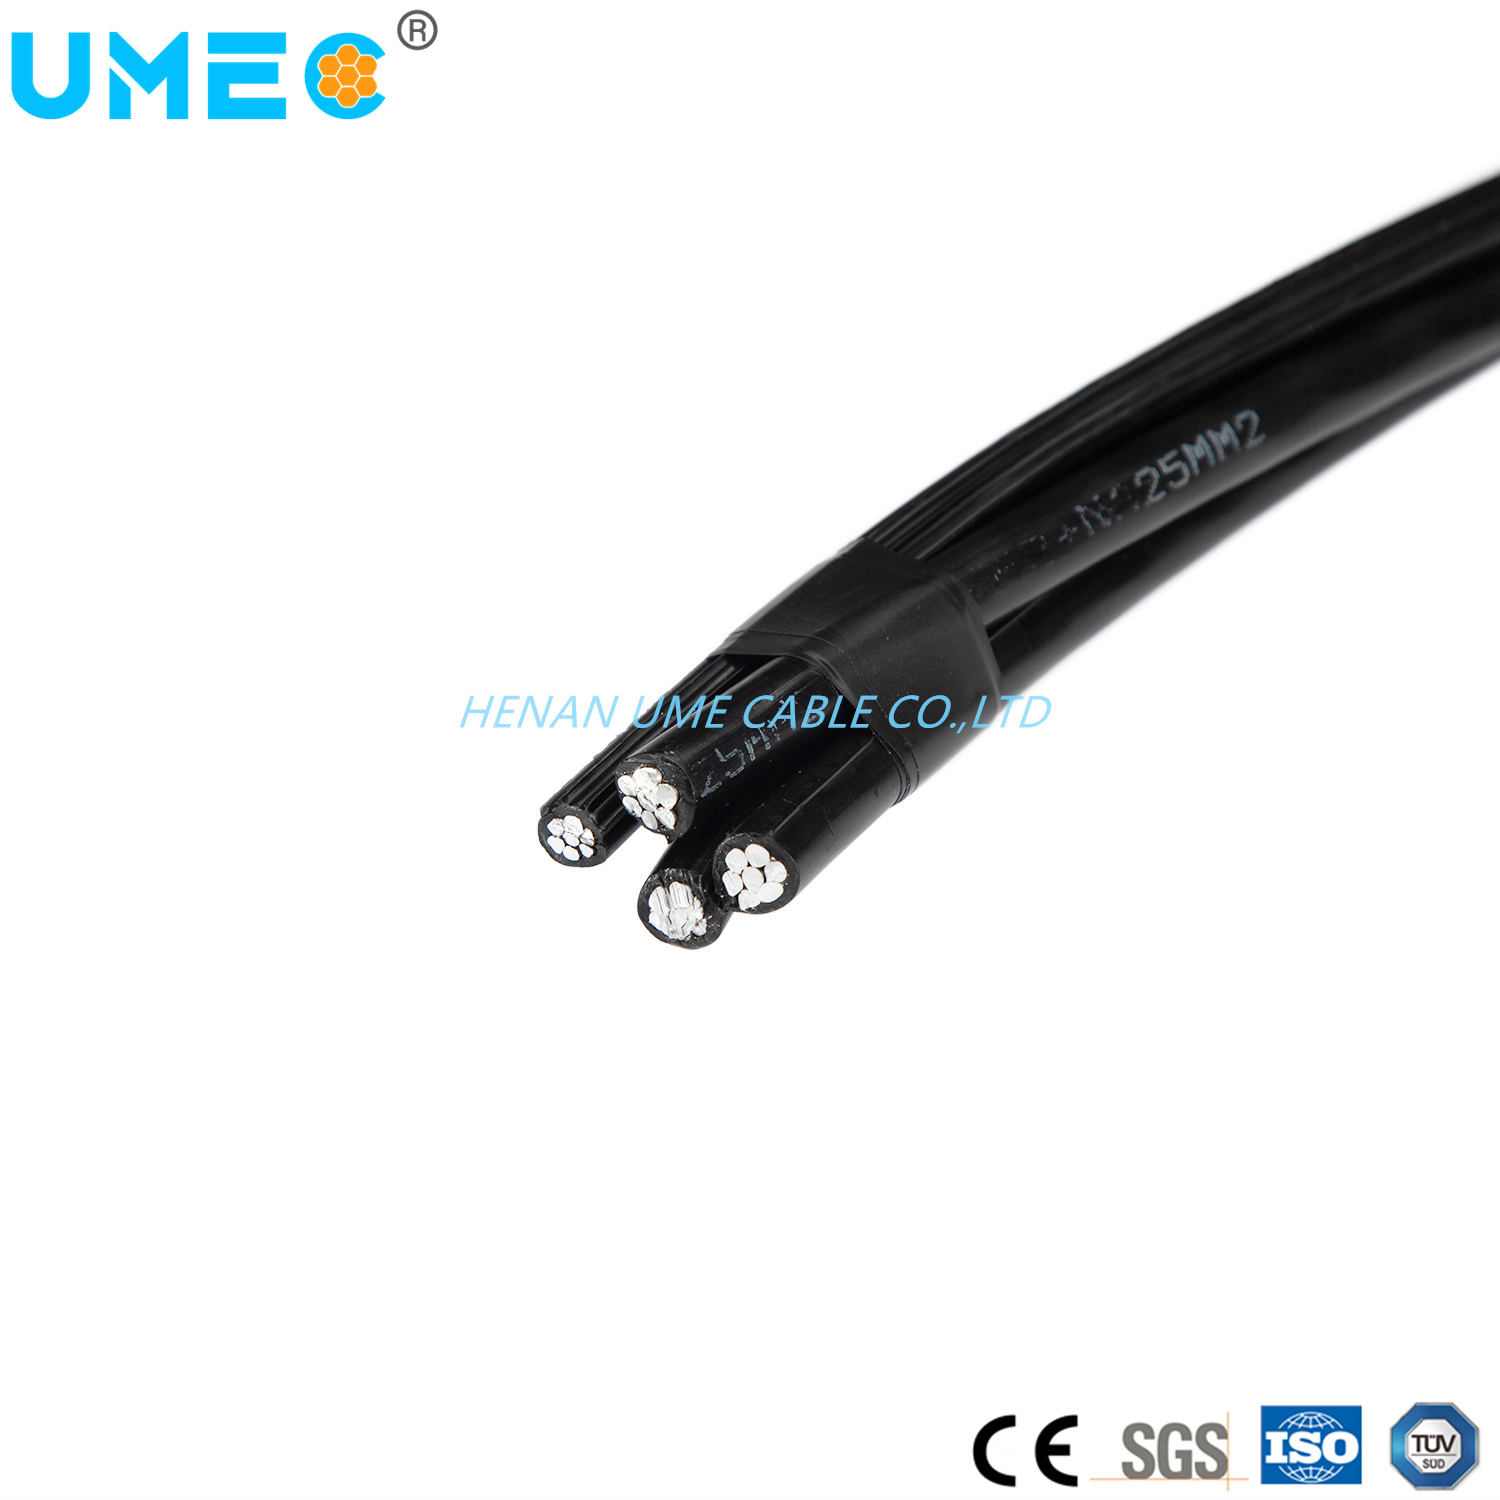 High Quality Quadruplex Service Drop Aluminum Conductor Cable Designed for Use to Supply 3 Phase Power